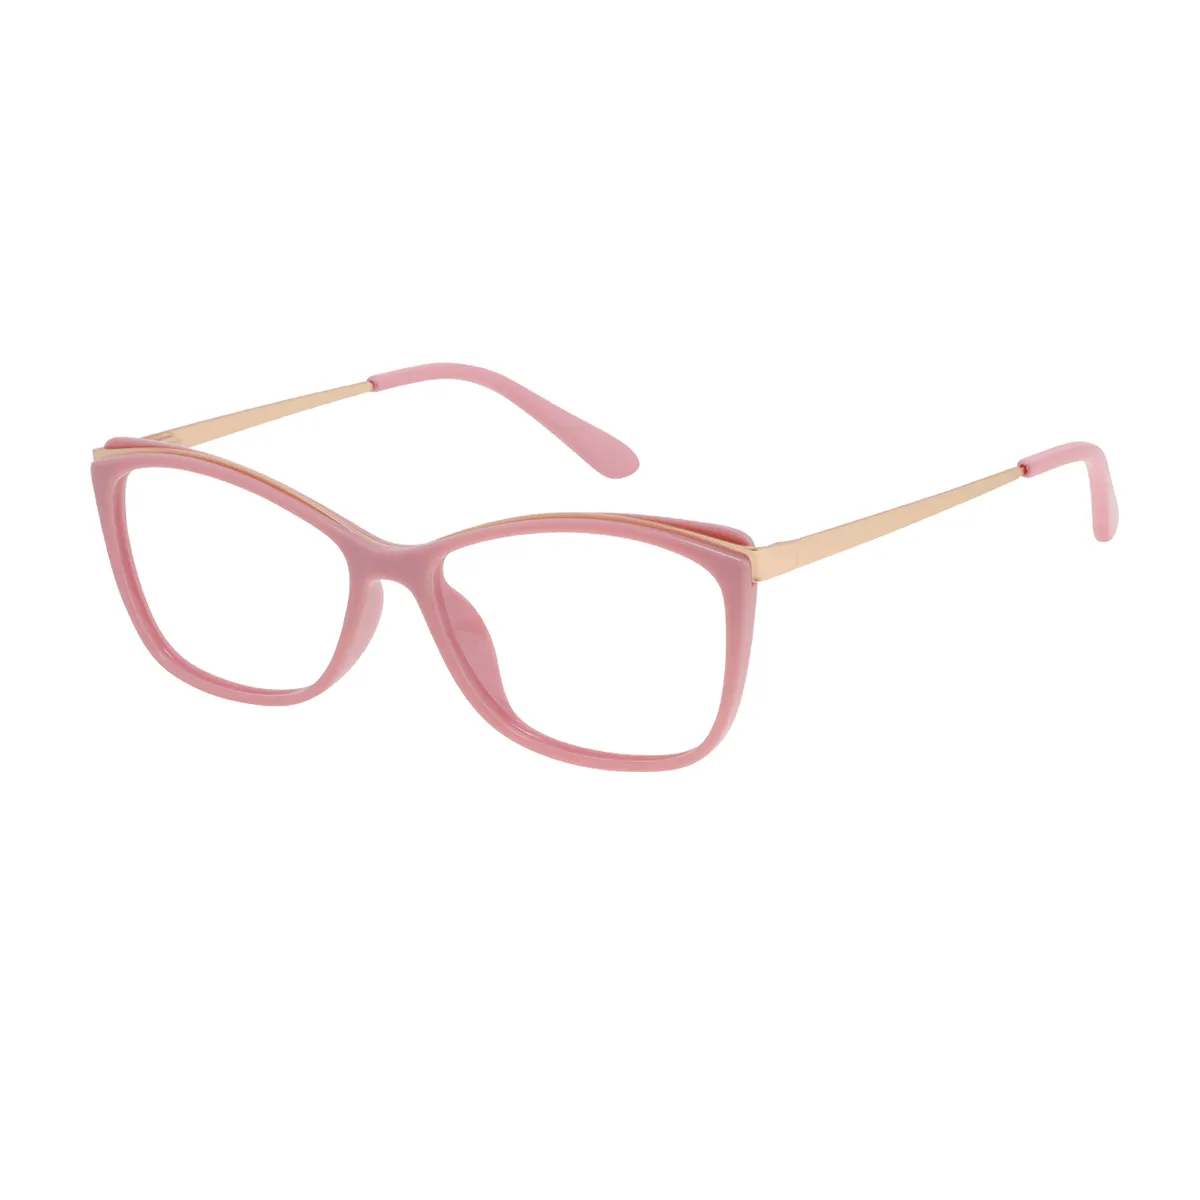 Fashion Rectangle Red-gold Reading Glasses for Women